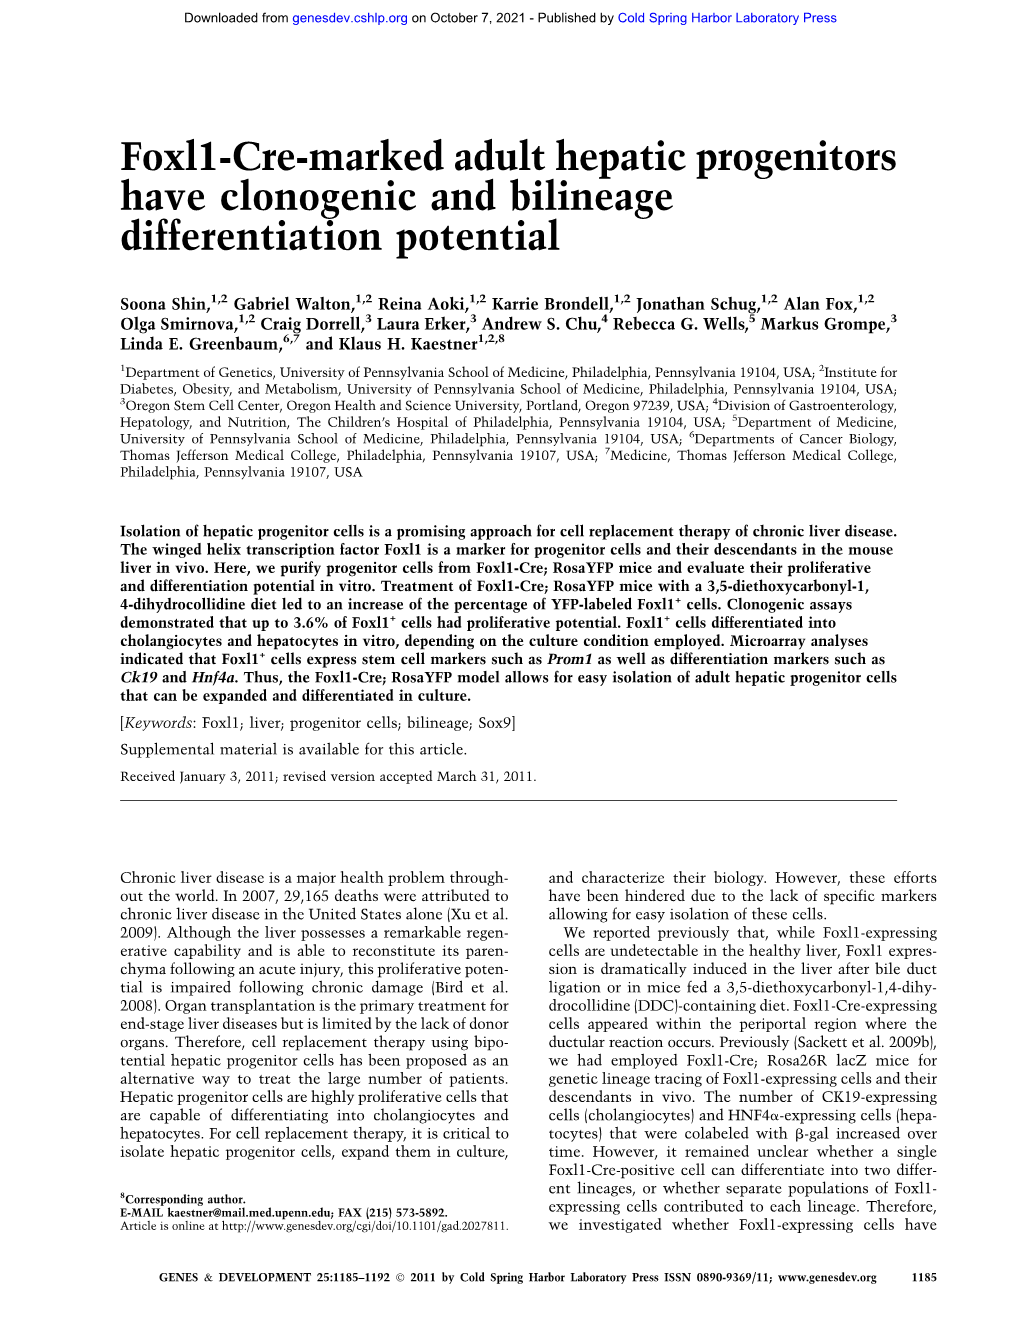 Foxl1-Cre-Marked Adult Hepatic Progenitors Have Clonogenic and Bilineage Differentiation Potential